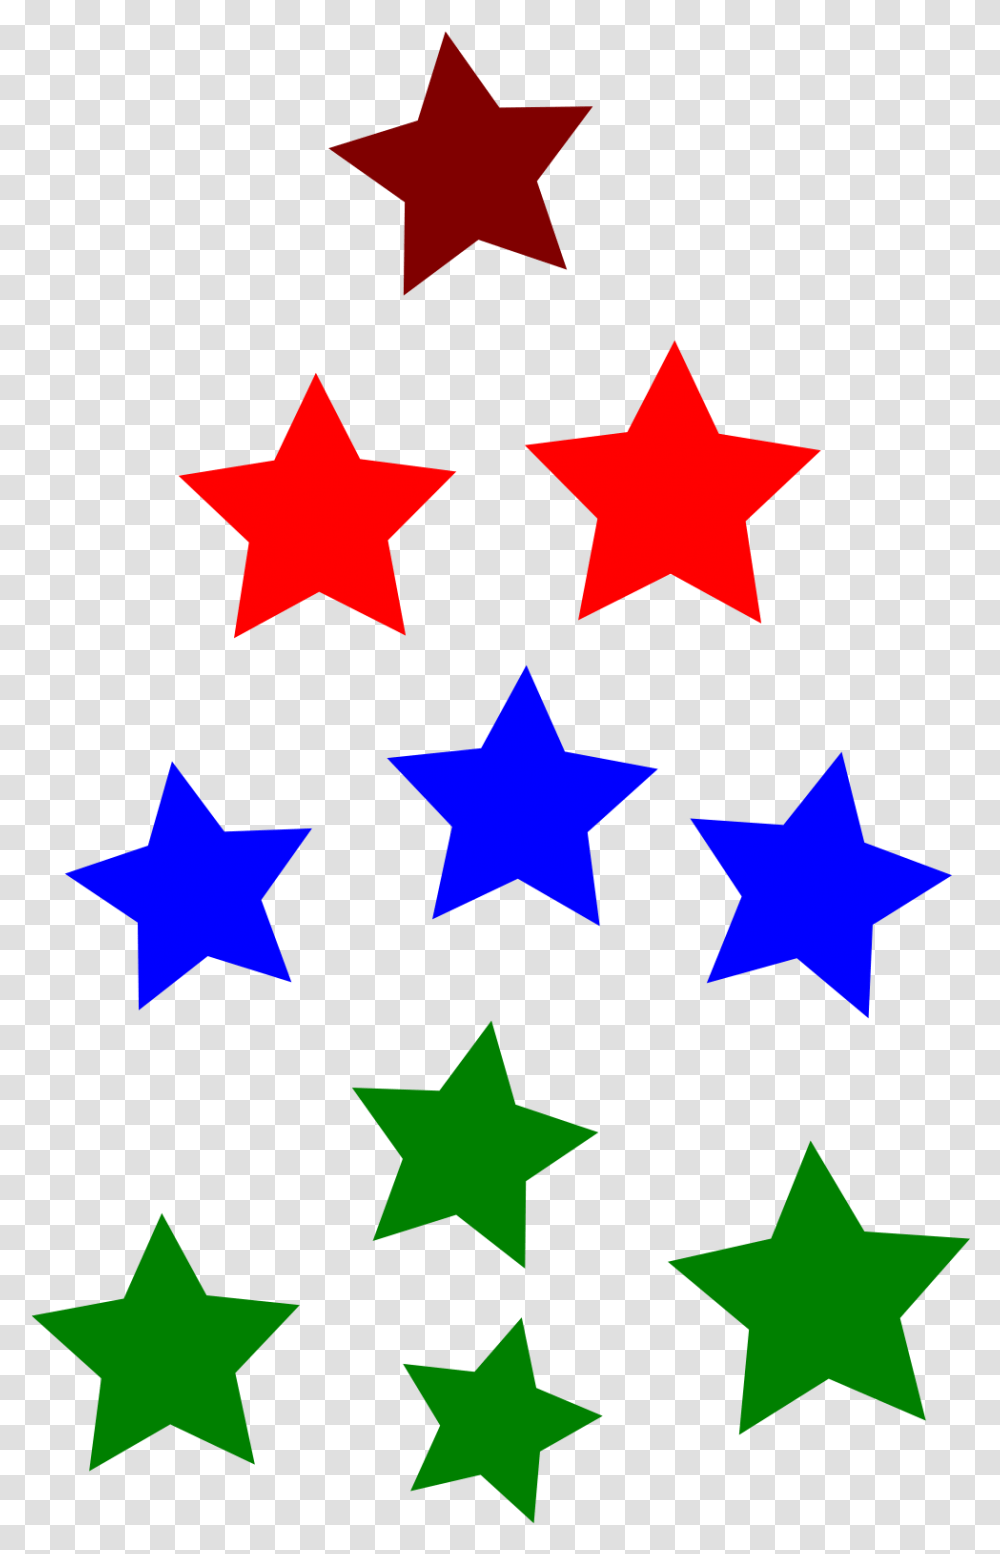 Clipart Math Counting Group Of 10 Objects, Star Symbol Transparent Png